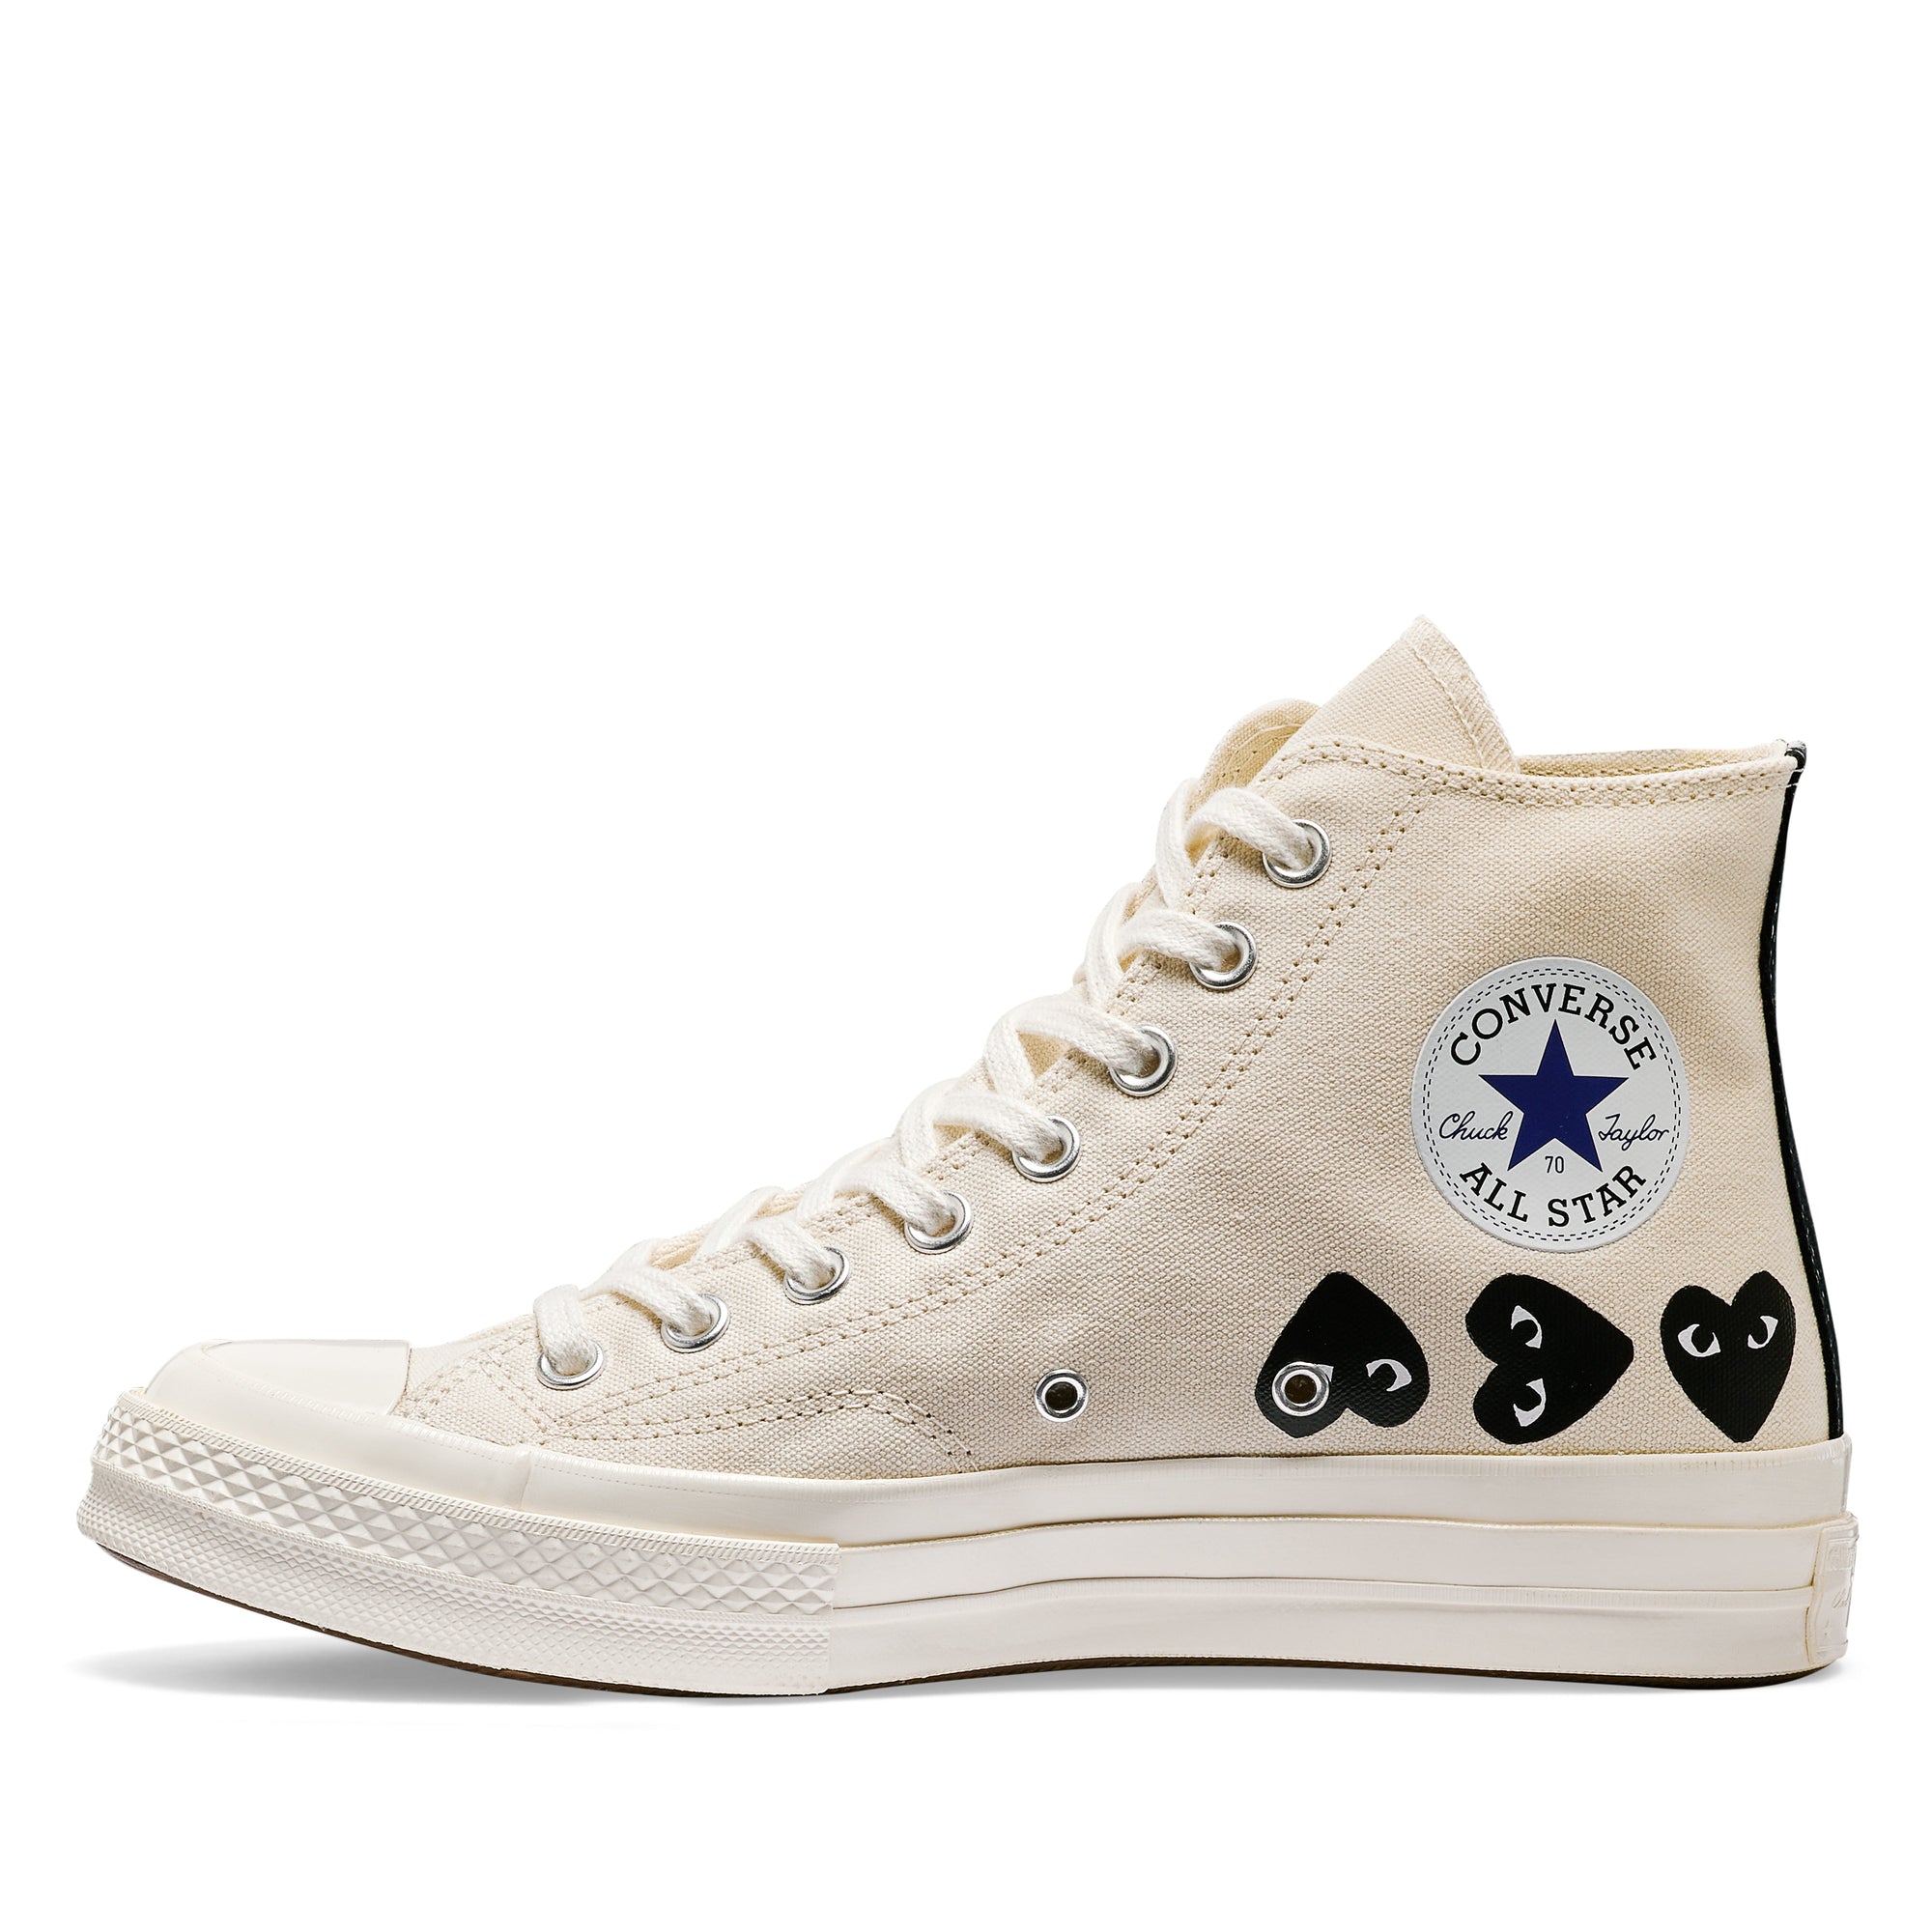 Play Converse - Multi Black Heart Chuck Taylor All Star '70 High Sneakers - (Beige) view 2